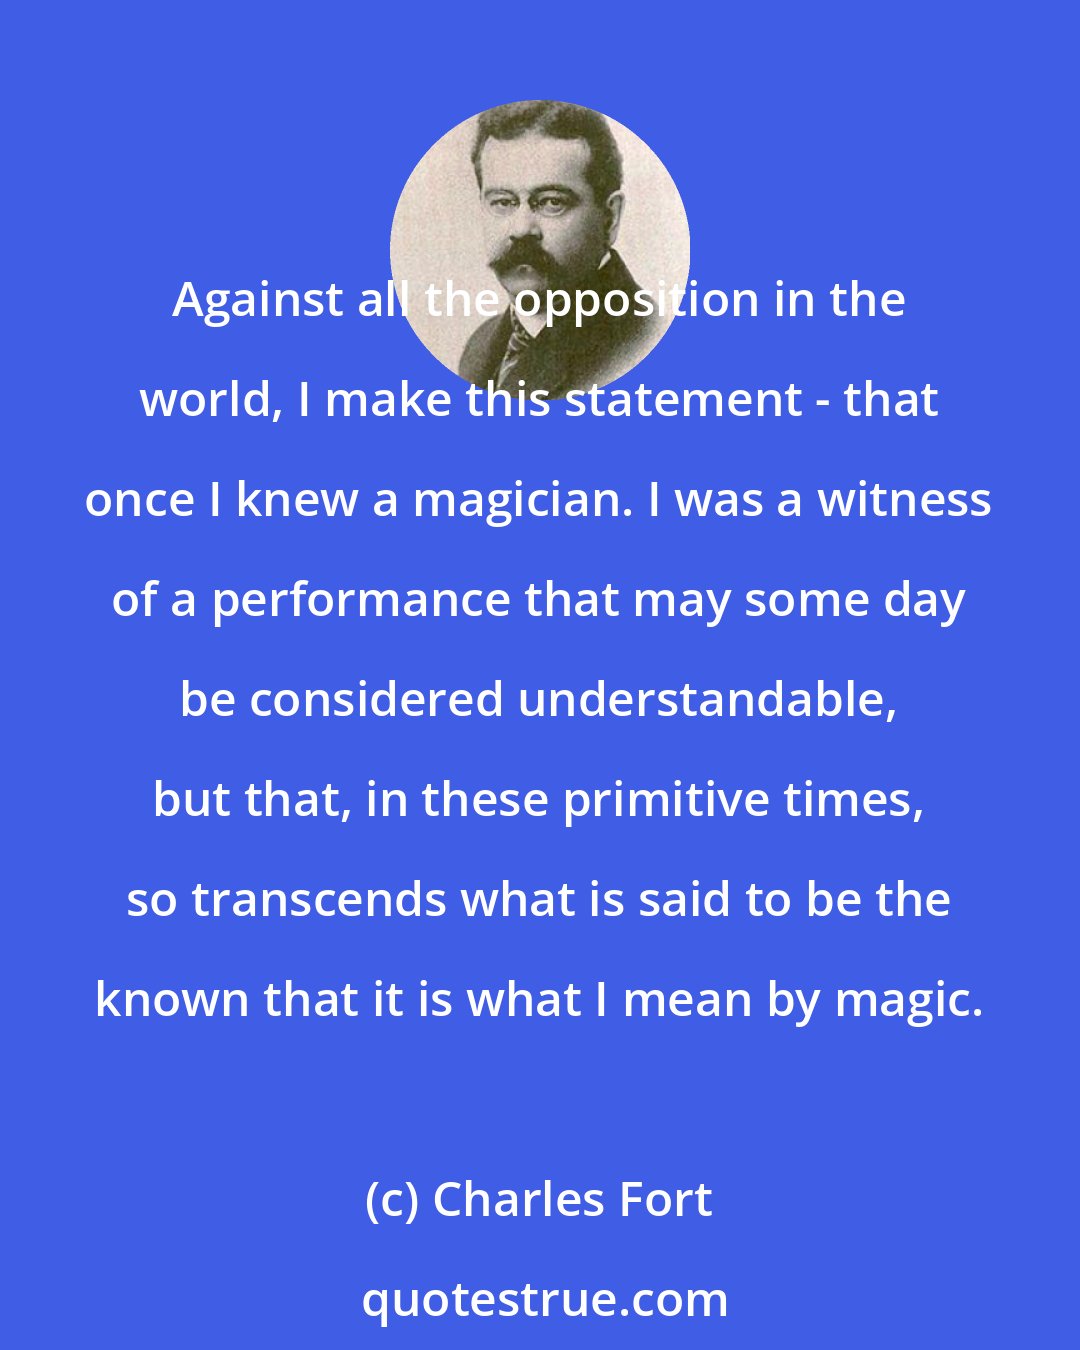 Charles Fort: Against all the opposition in the world, I make this statement - that once I knew a magician. I was a witness of a performance that may some day be considered understandable, but that, in these primitive times, so transcends what is said to be the known that it is what I mean by magic.